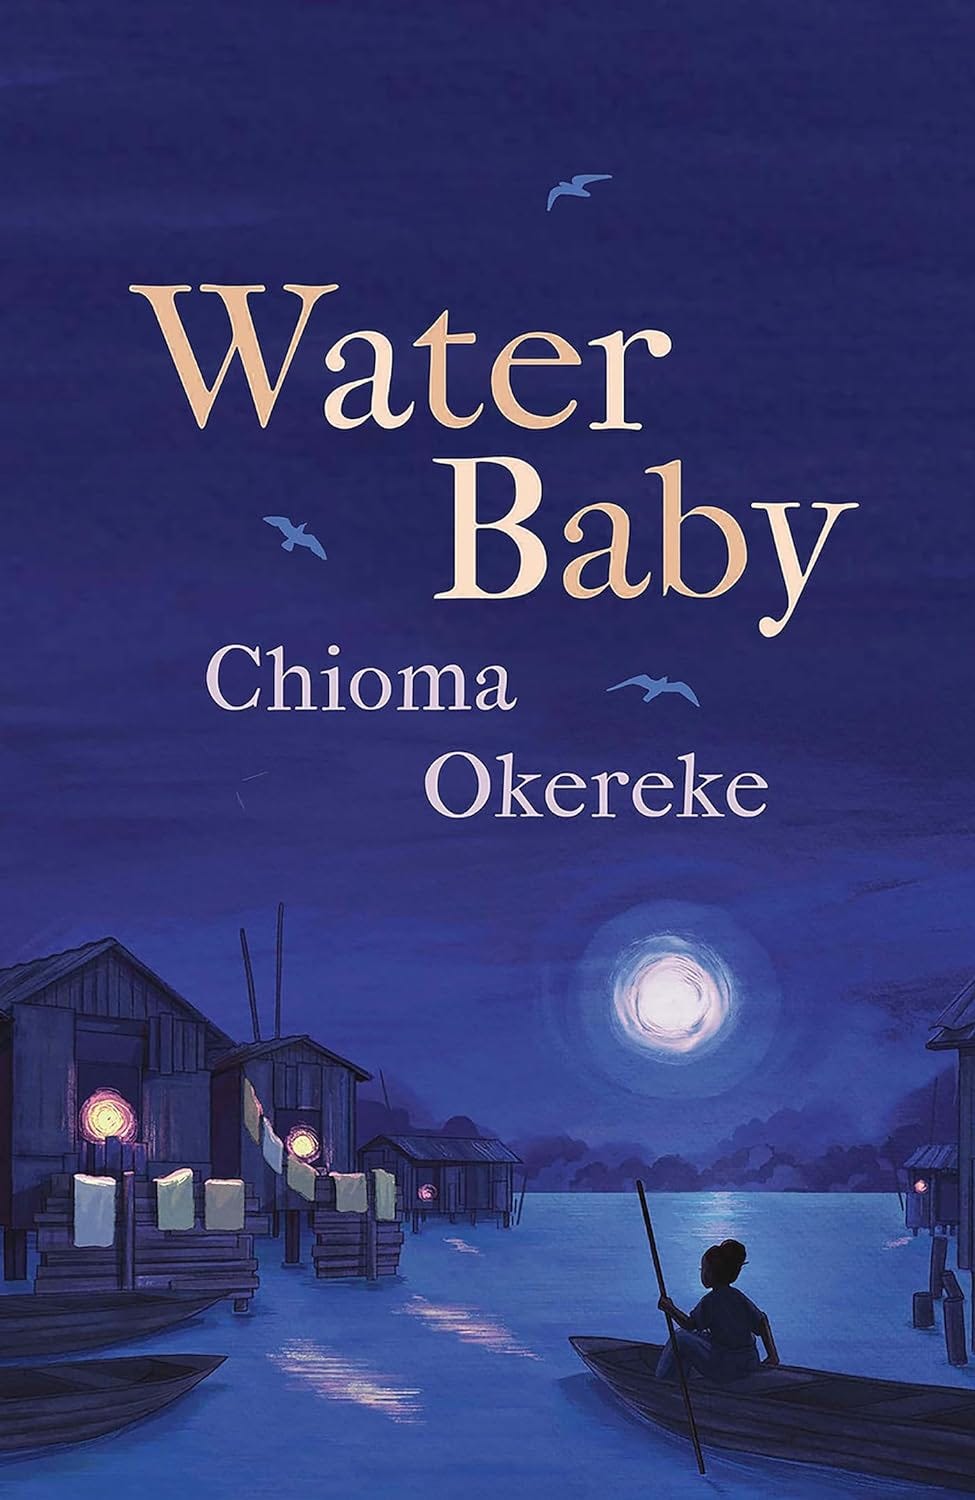 Water Baby: An uplifting coming-of-age story from the author of Bitter Leaf  eBook : Okereke, Chioma: Amazon.co.uk: Kindle Store